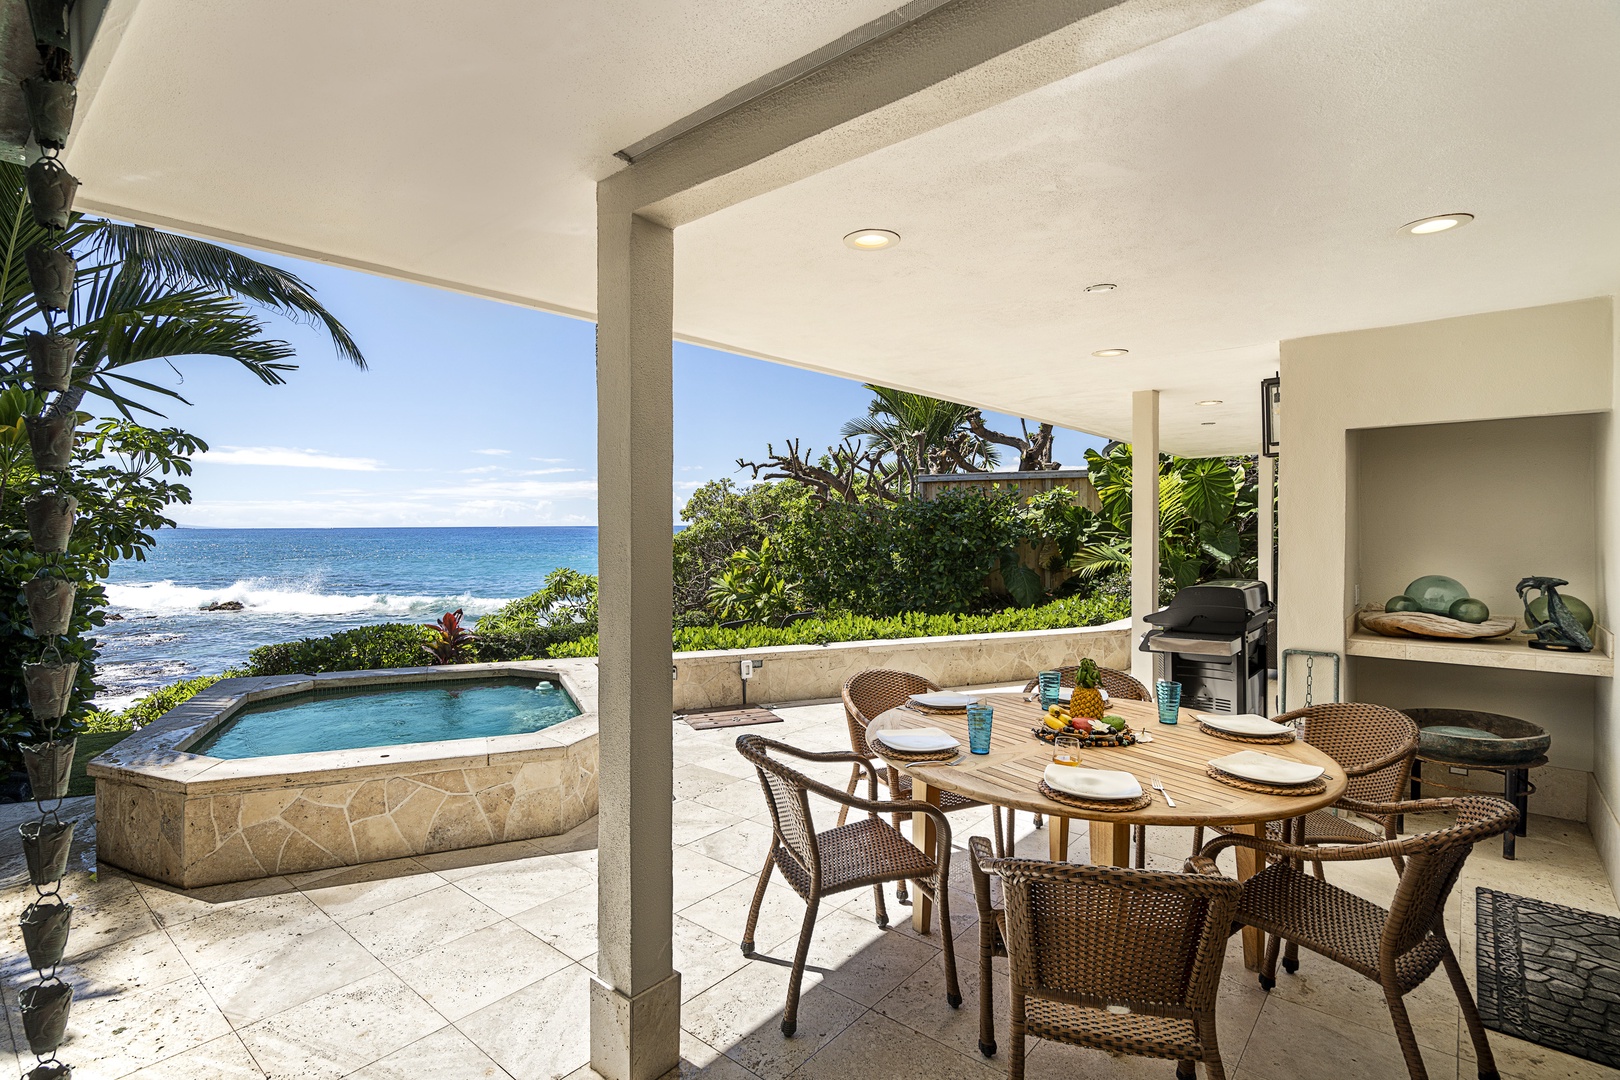 Kailua Kona Vacation Rentals, Ali'i Point #7 - Outdoor dining area to gather with friends for a good meal